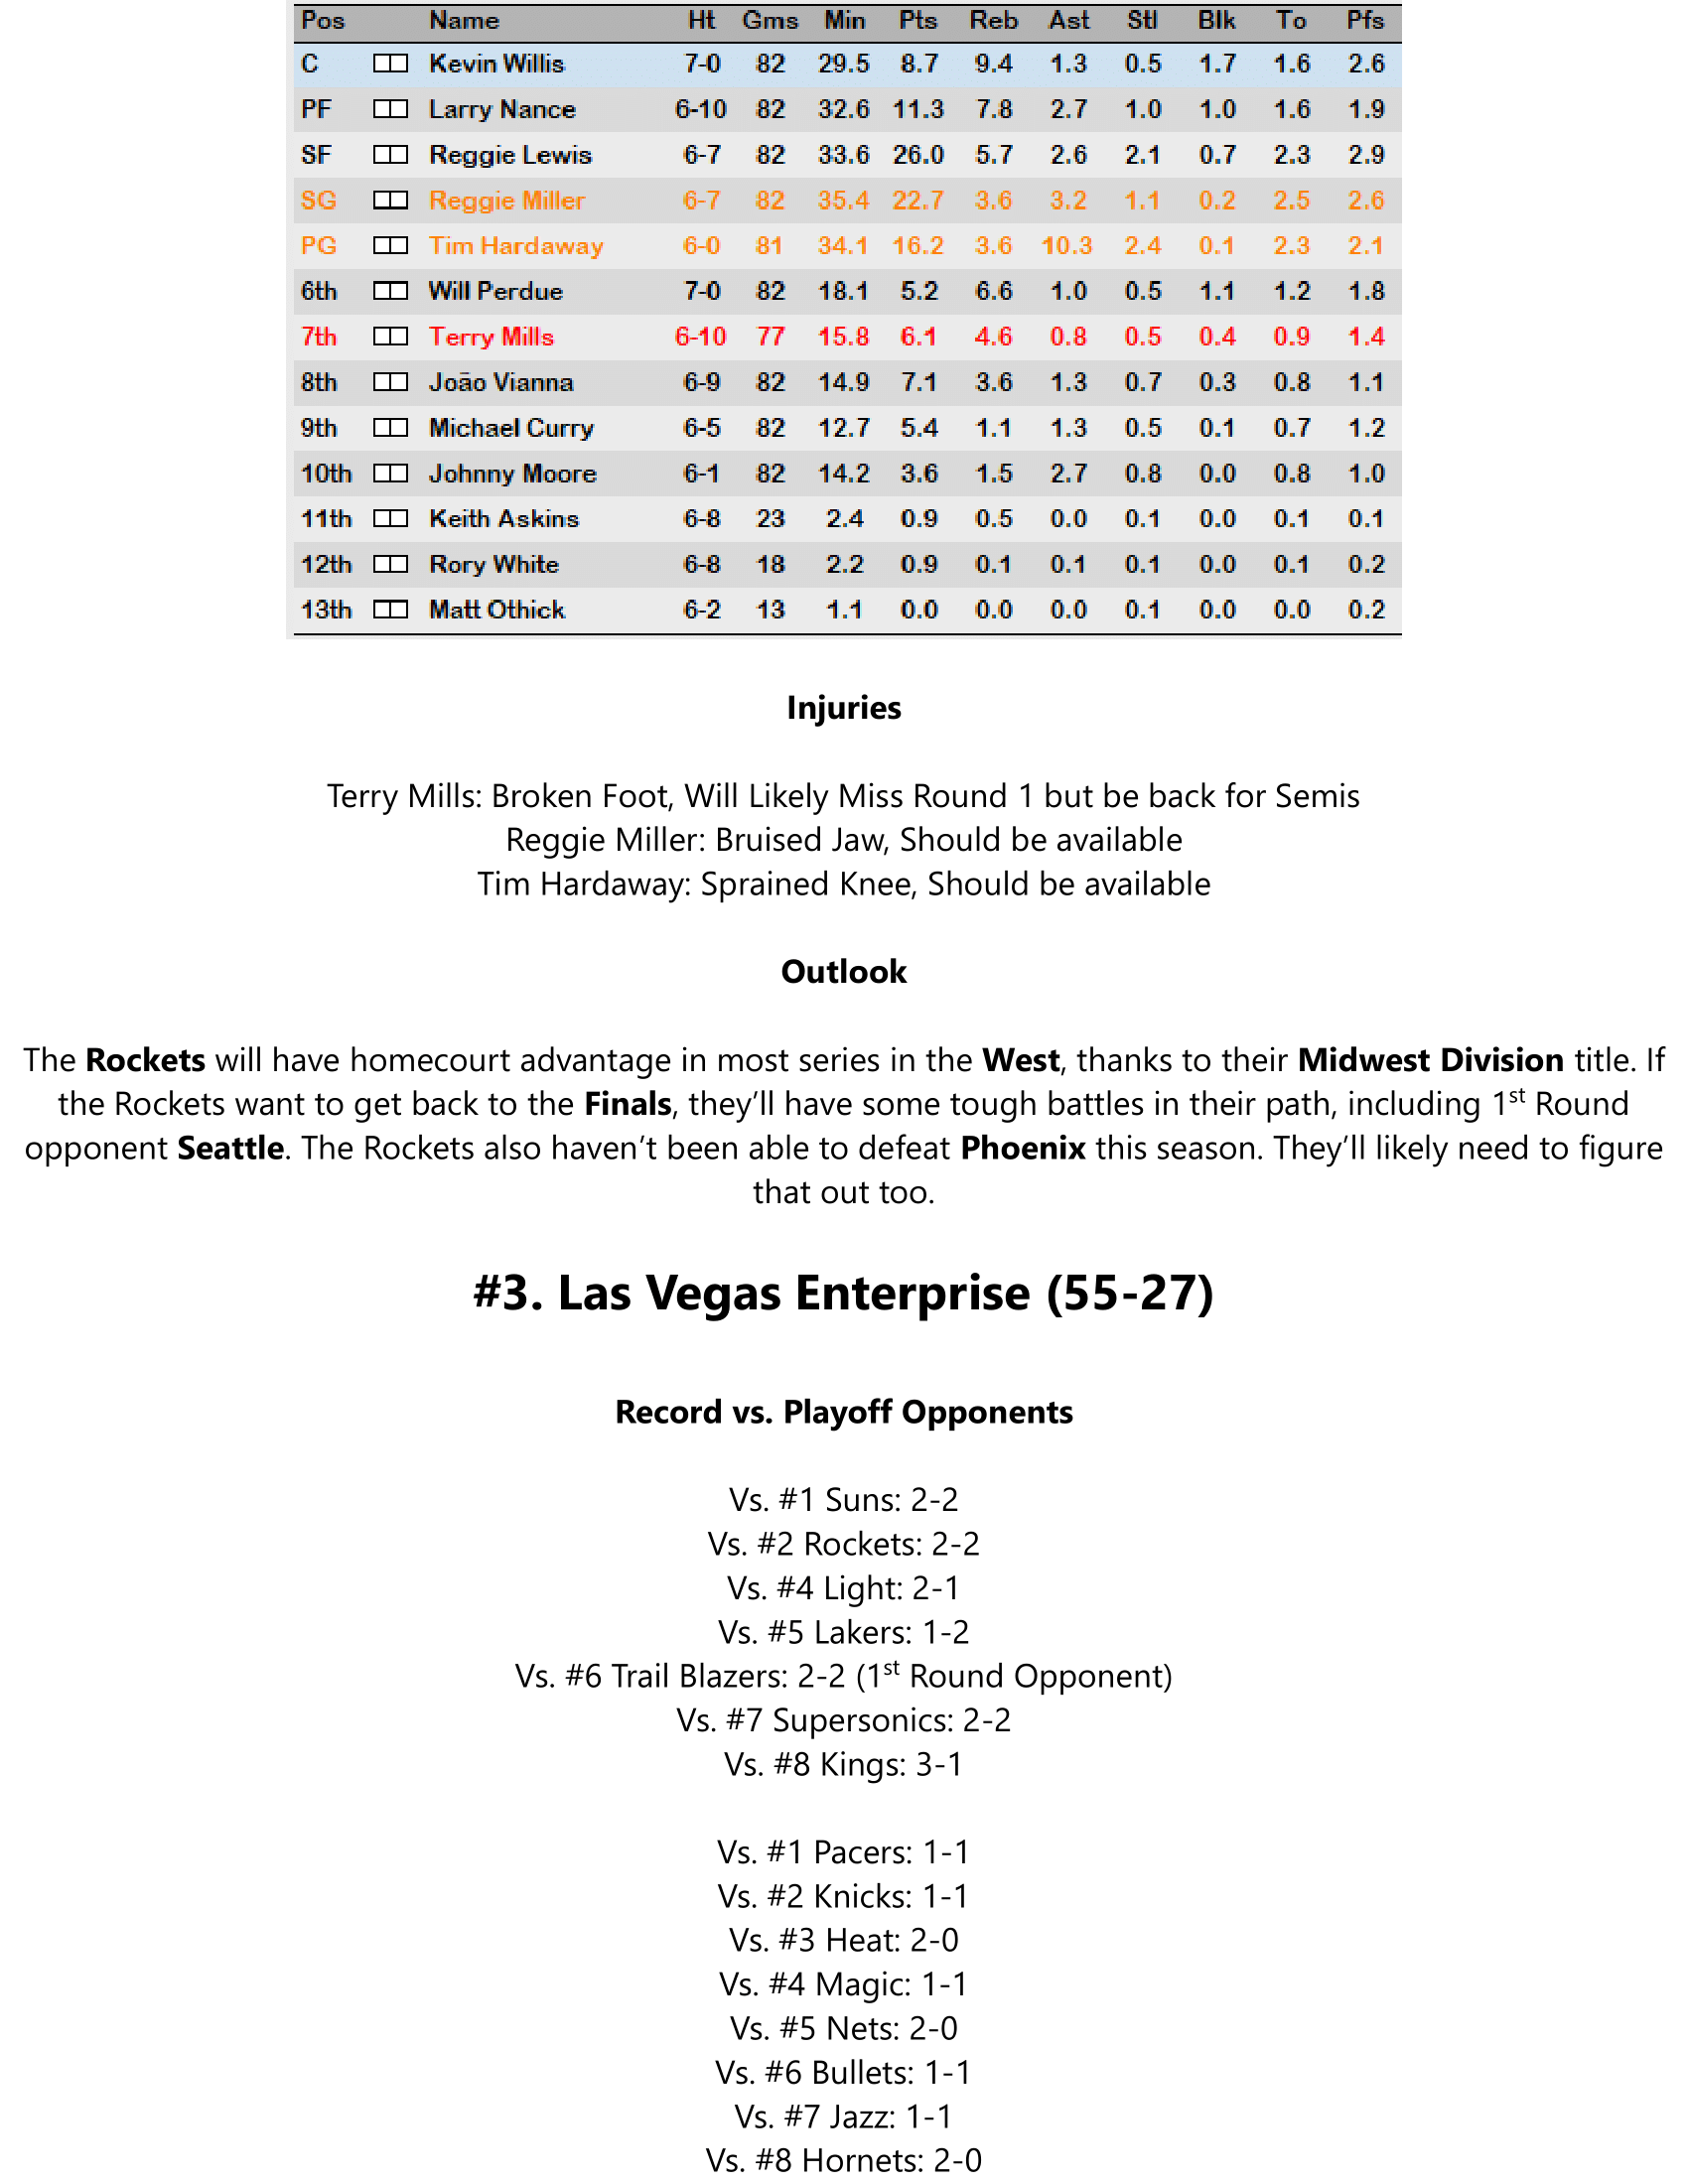 92-93-Part-4-Playoff-Preview-04.png